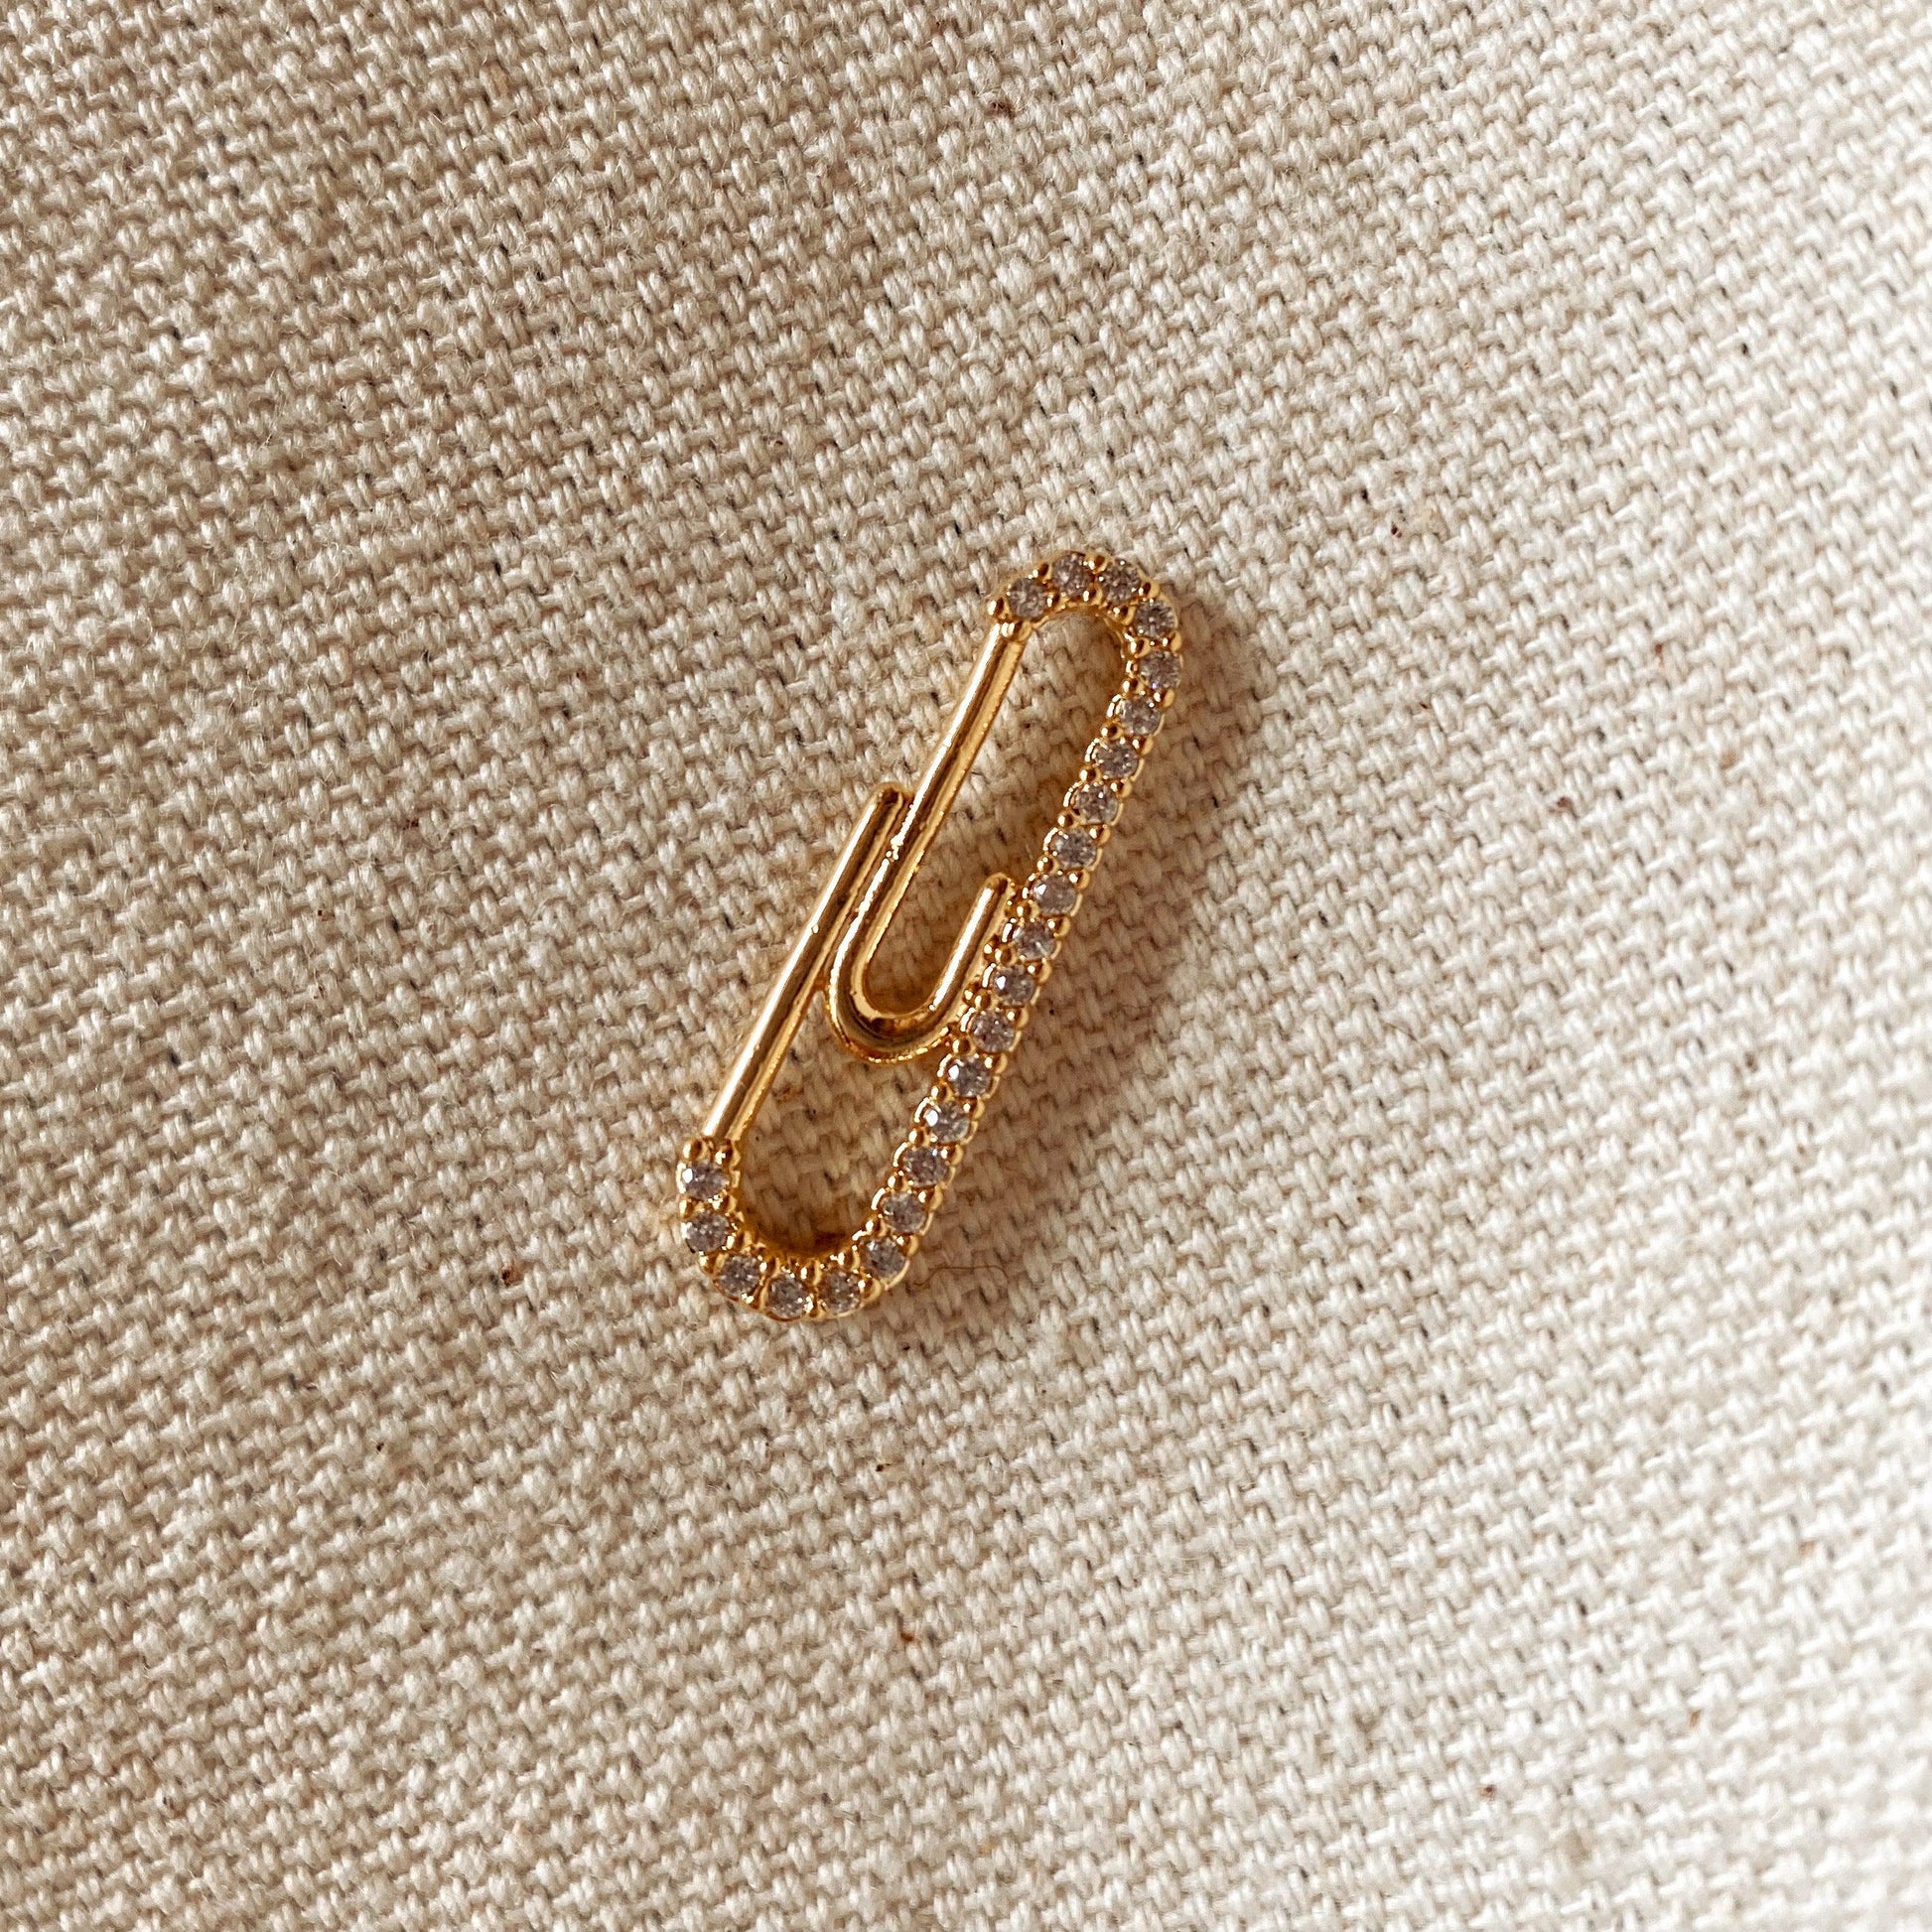 GoldFi 18k Gold Filled Paper Clip Charm Featuring Cubic Zirconia Accents